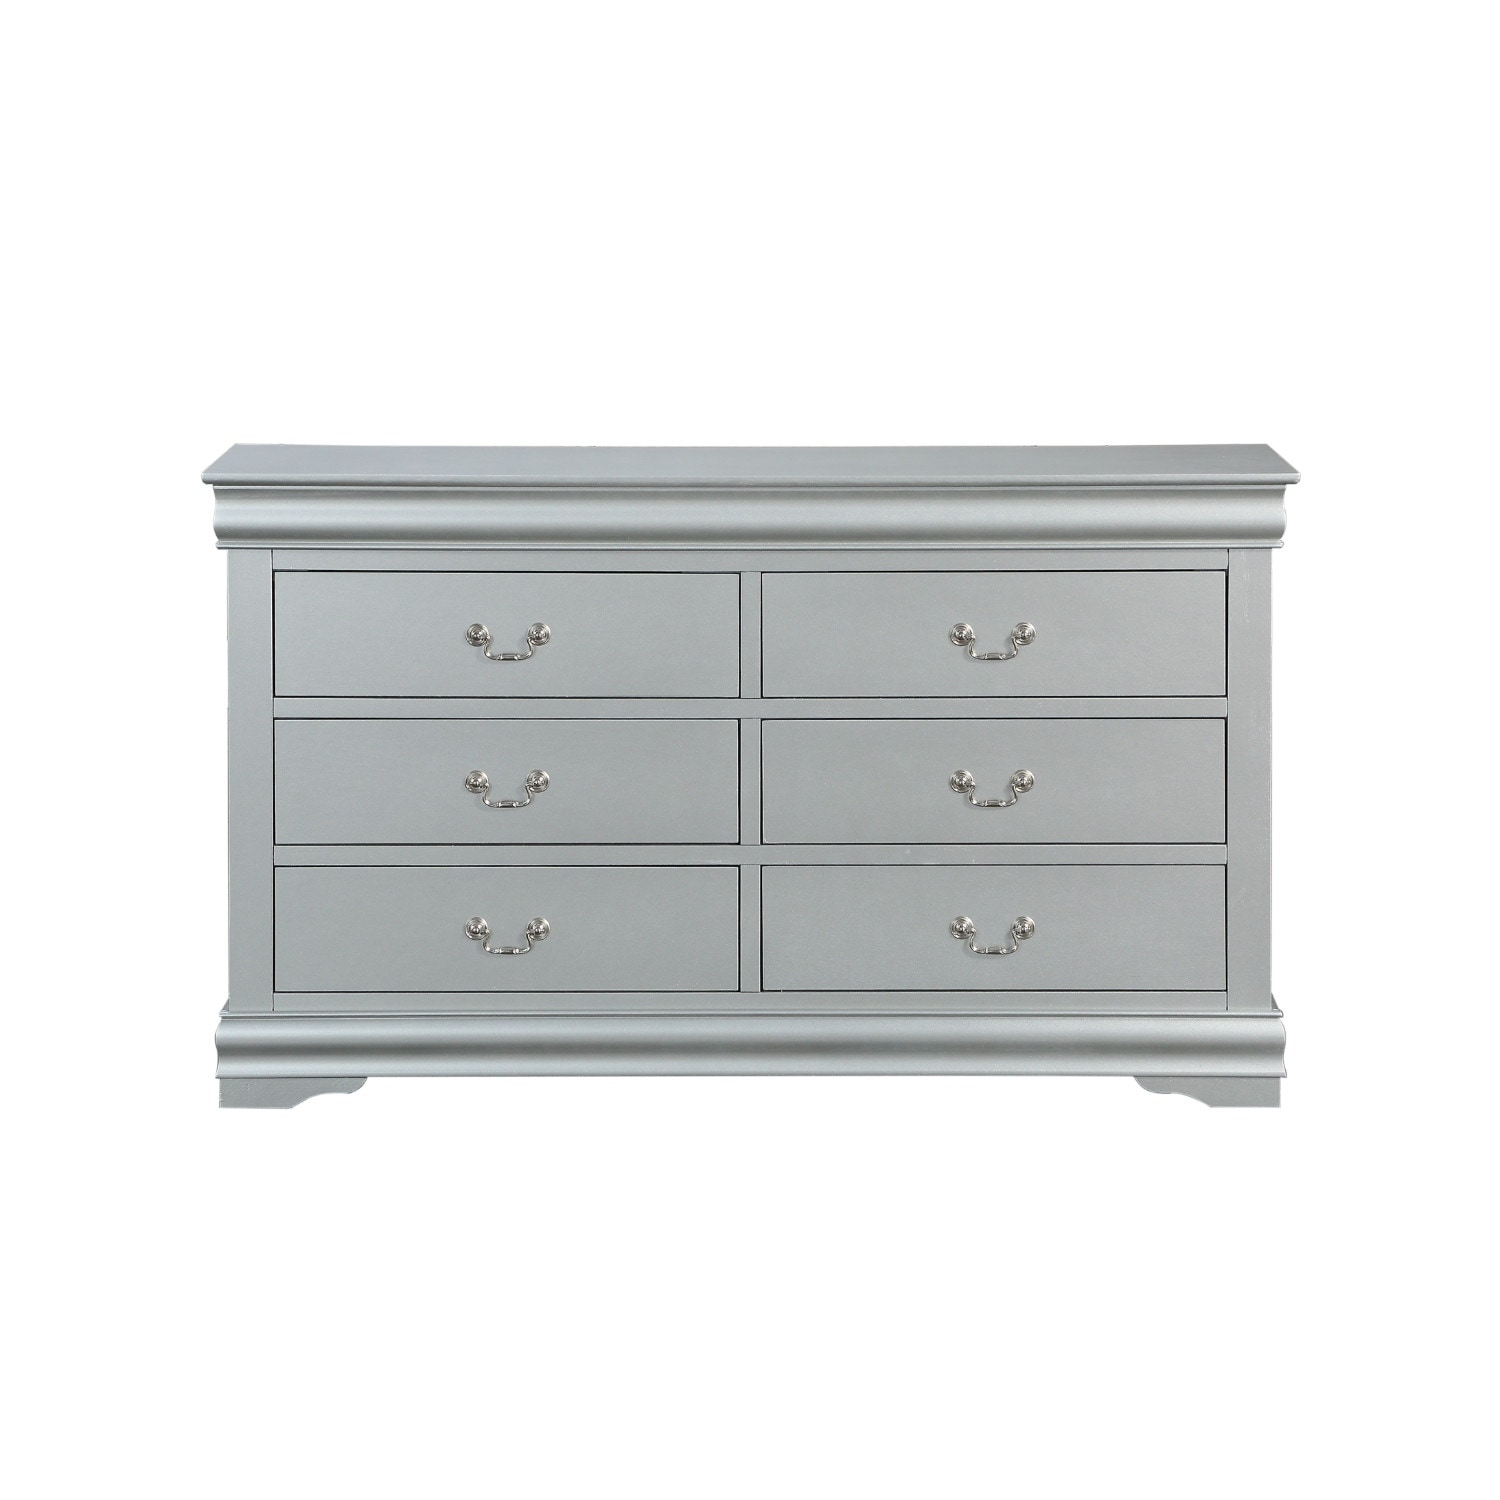 Shop Six Drawers Wooden Dresser With Metal Handles And Bracket